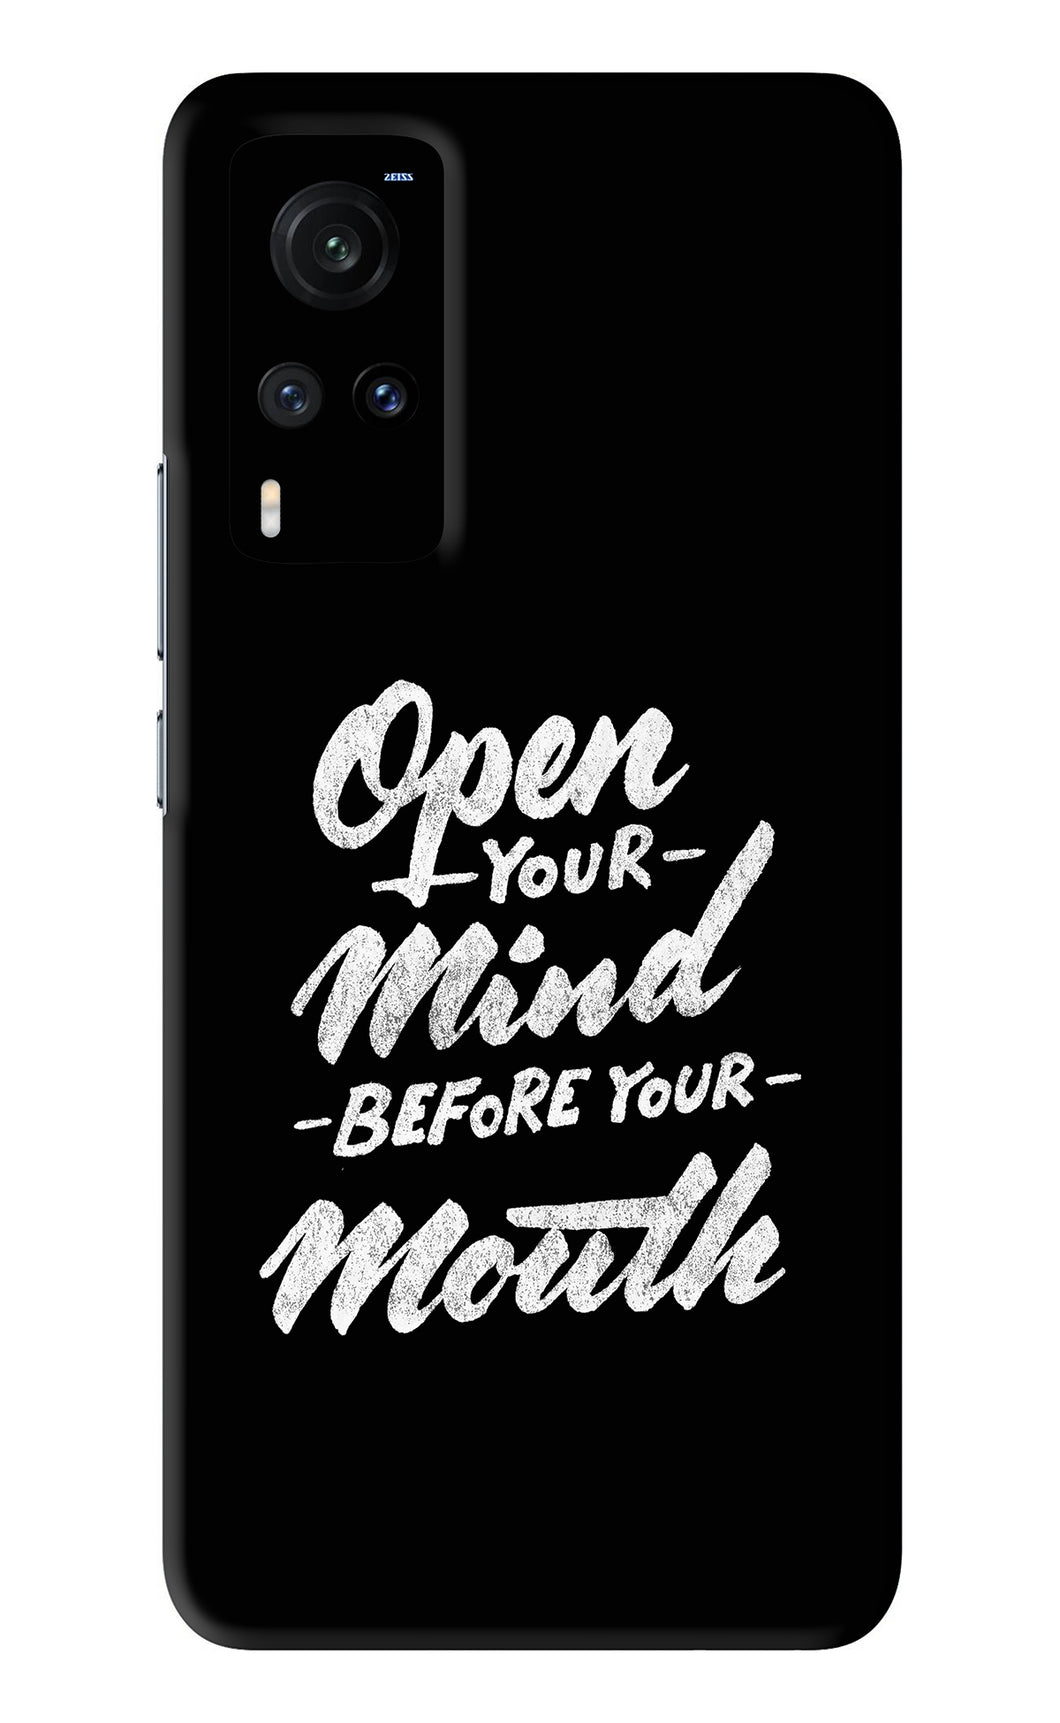 Open Your Mind Before Your Mouth Vivo X60 Back Skin Wrap